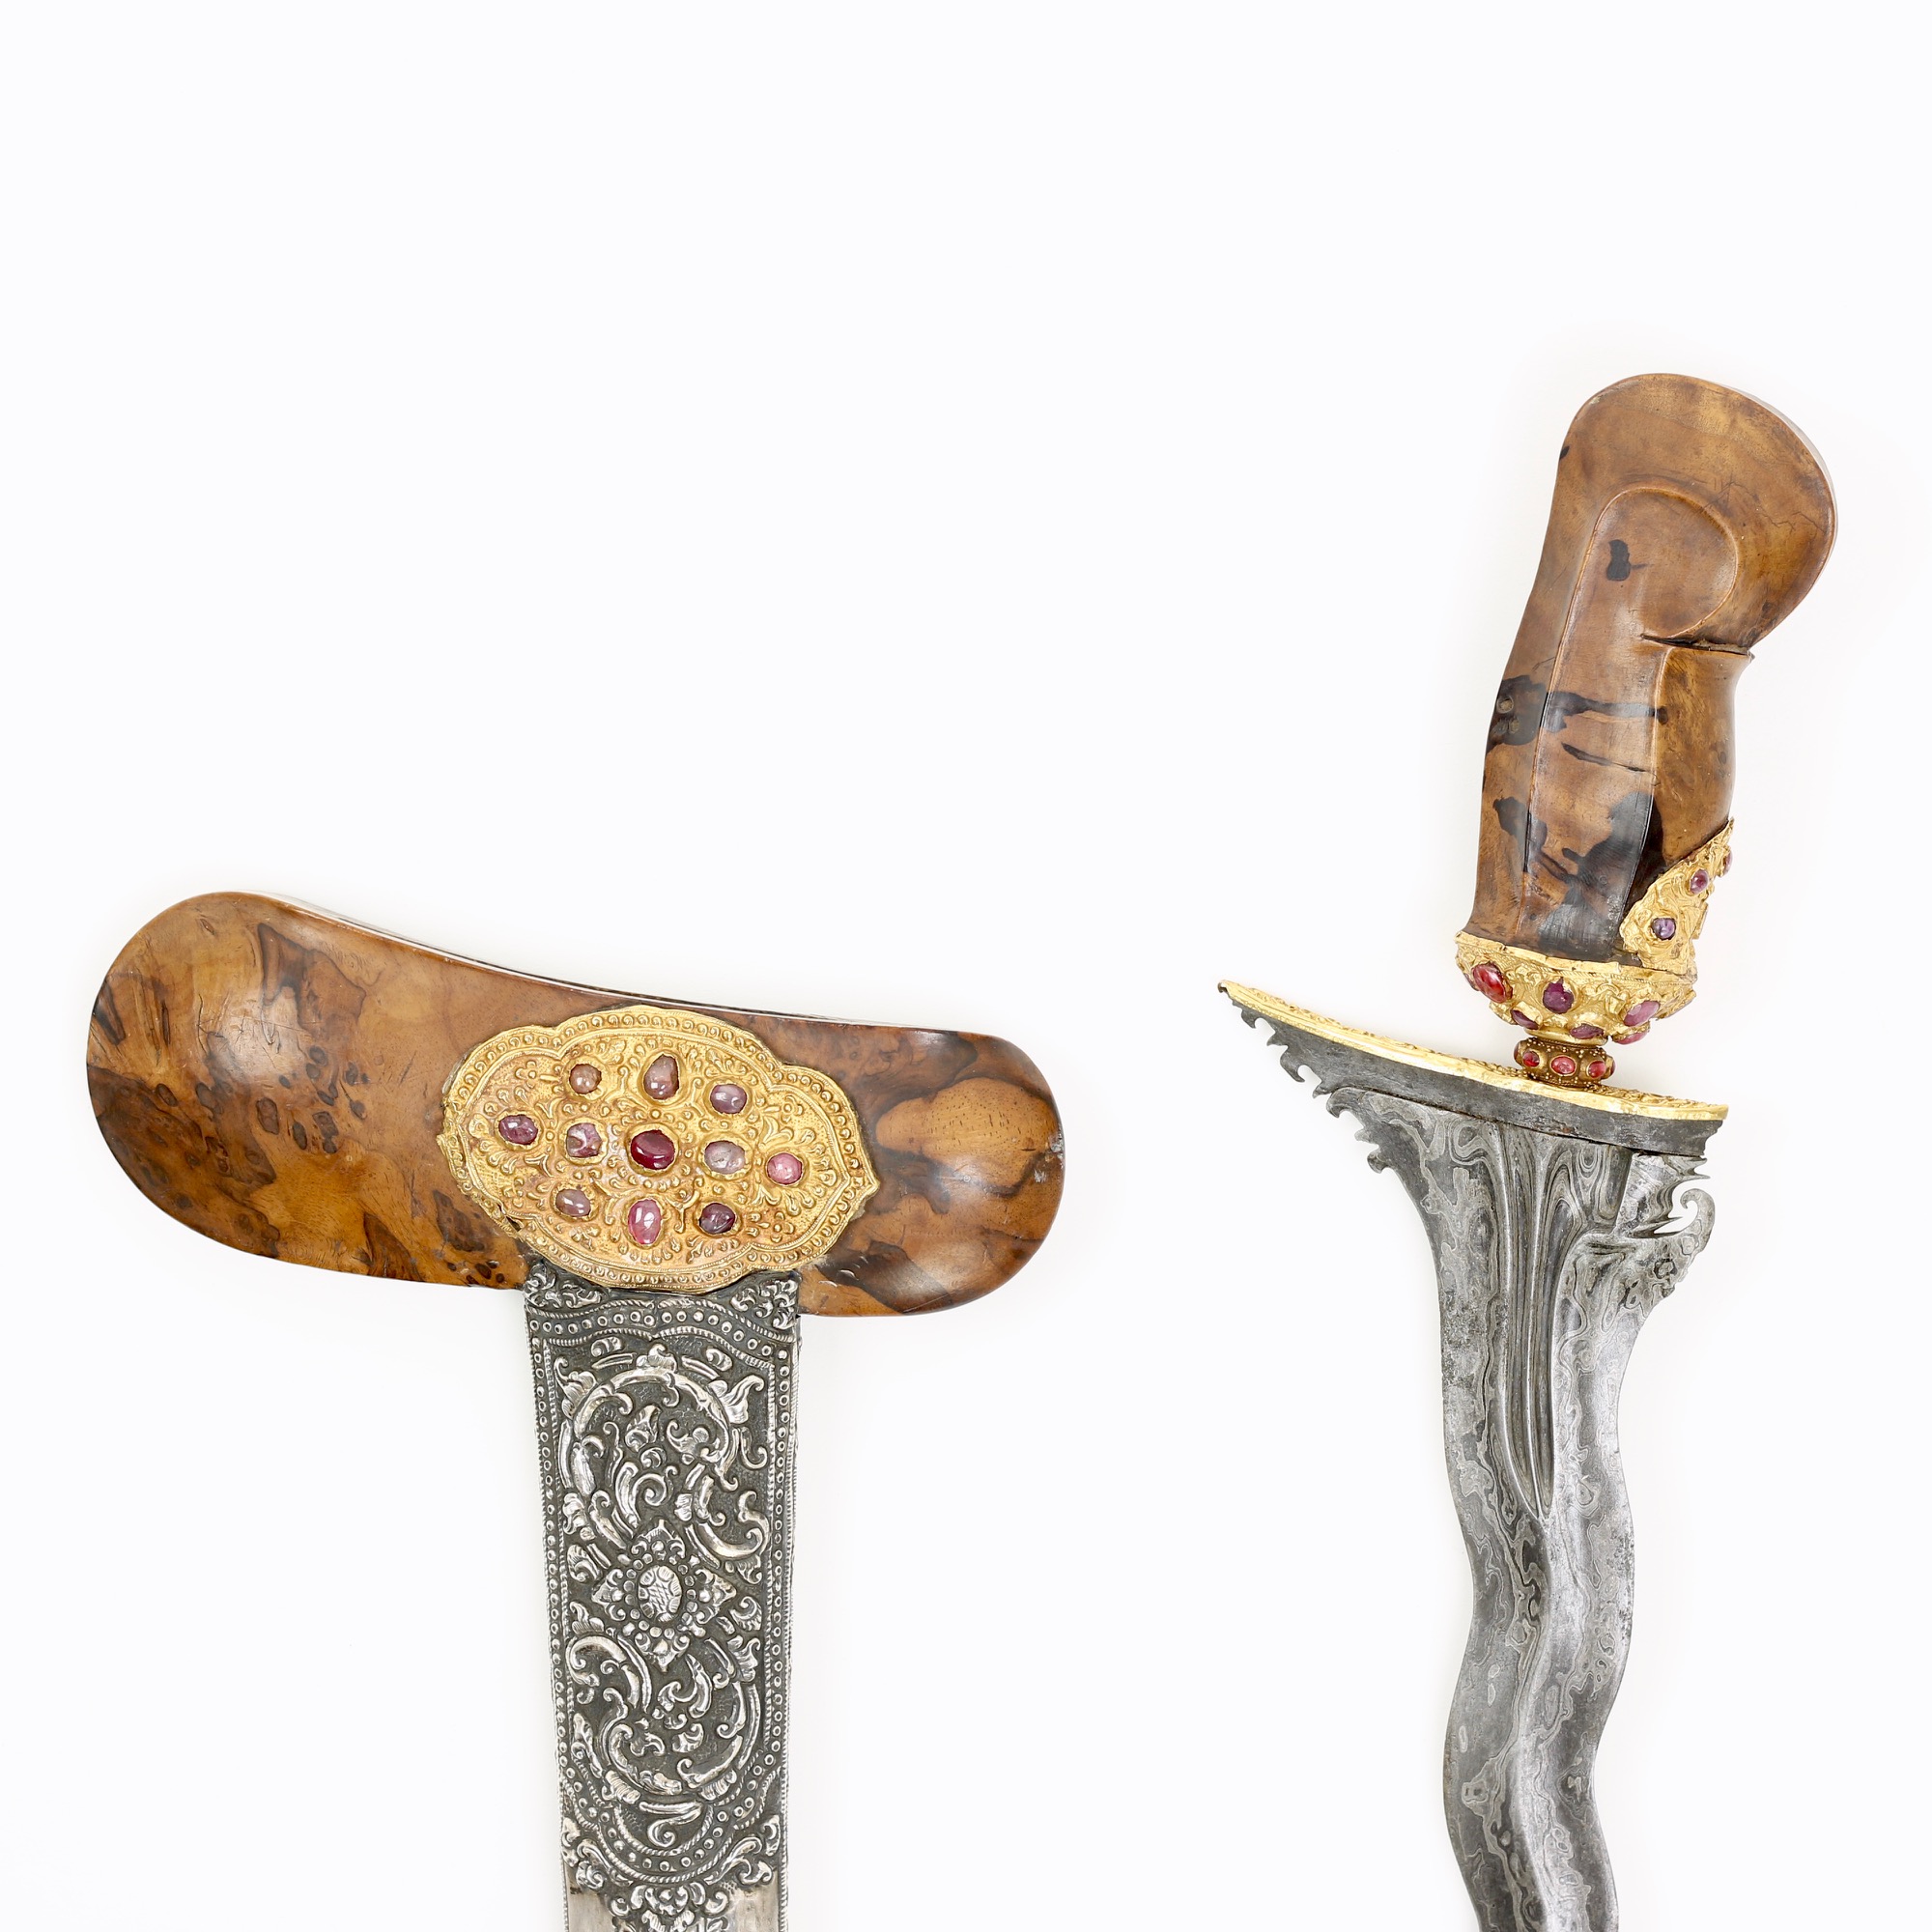 A Balinese keris with golden and gemstone decoration